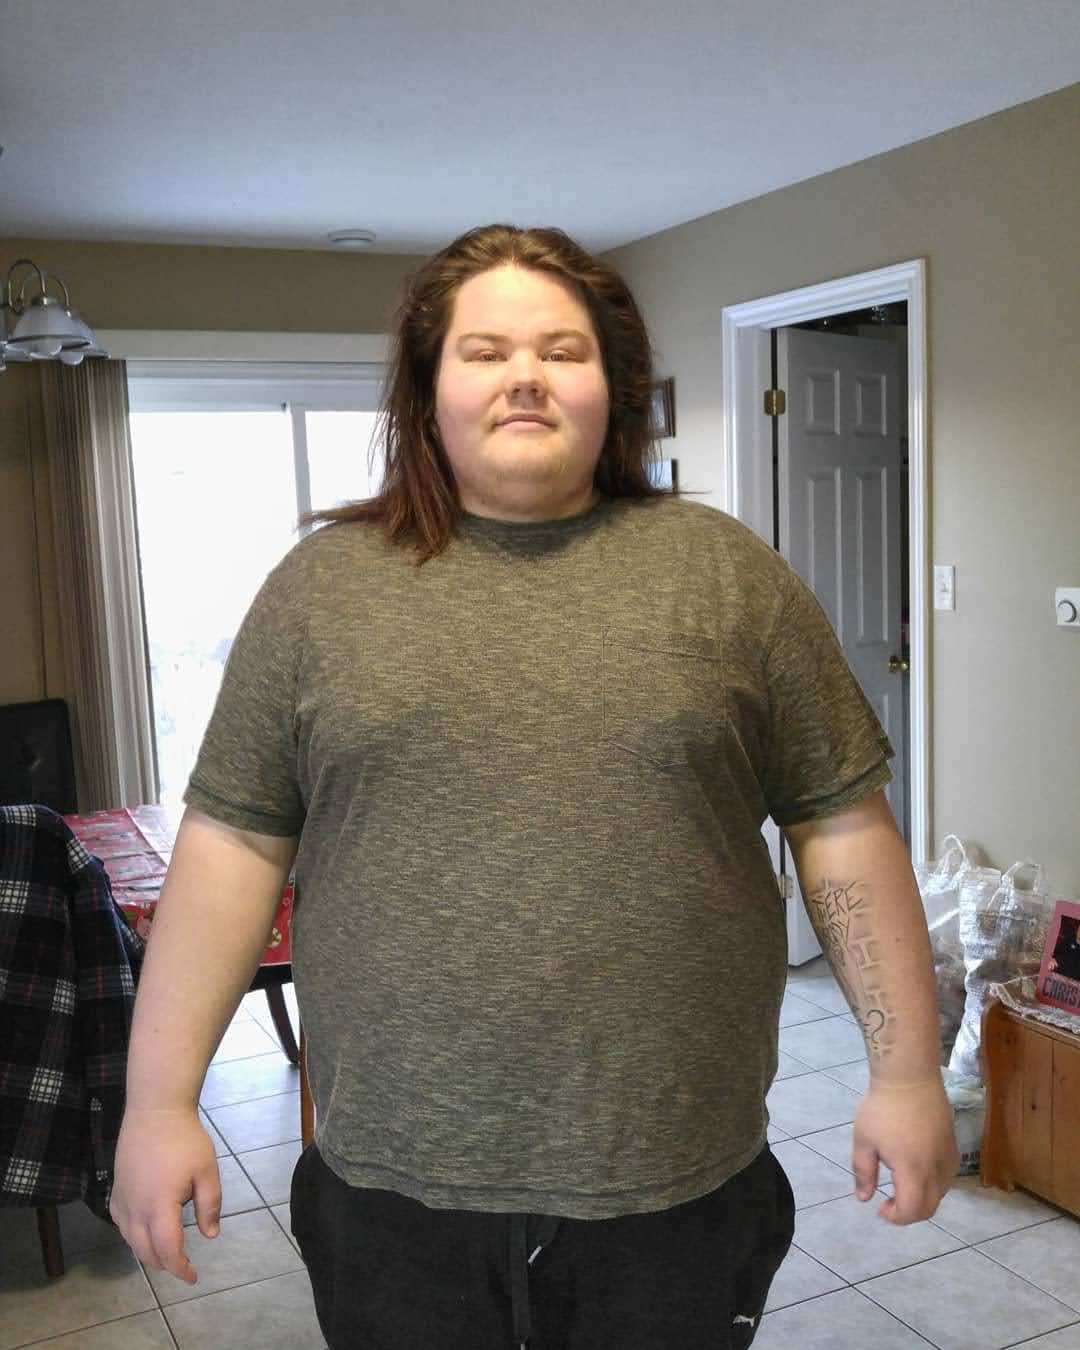 GETTING MY SKIN REMOVED, -145 LB WEIGHT LOSS